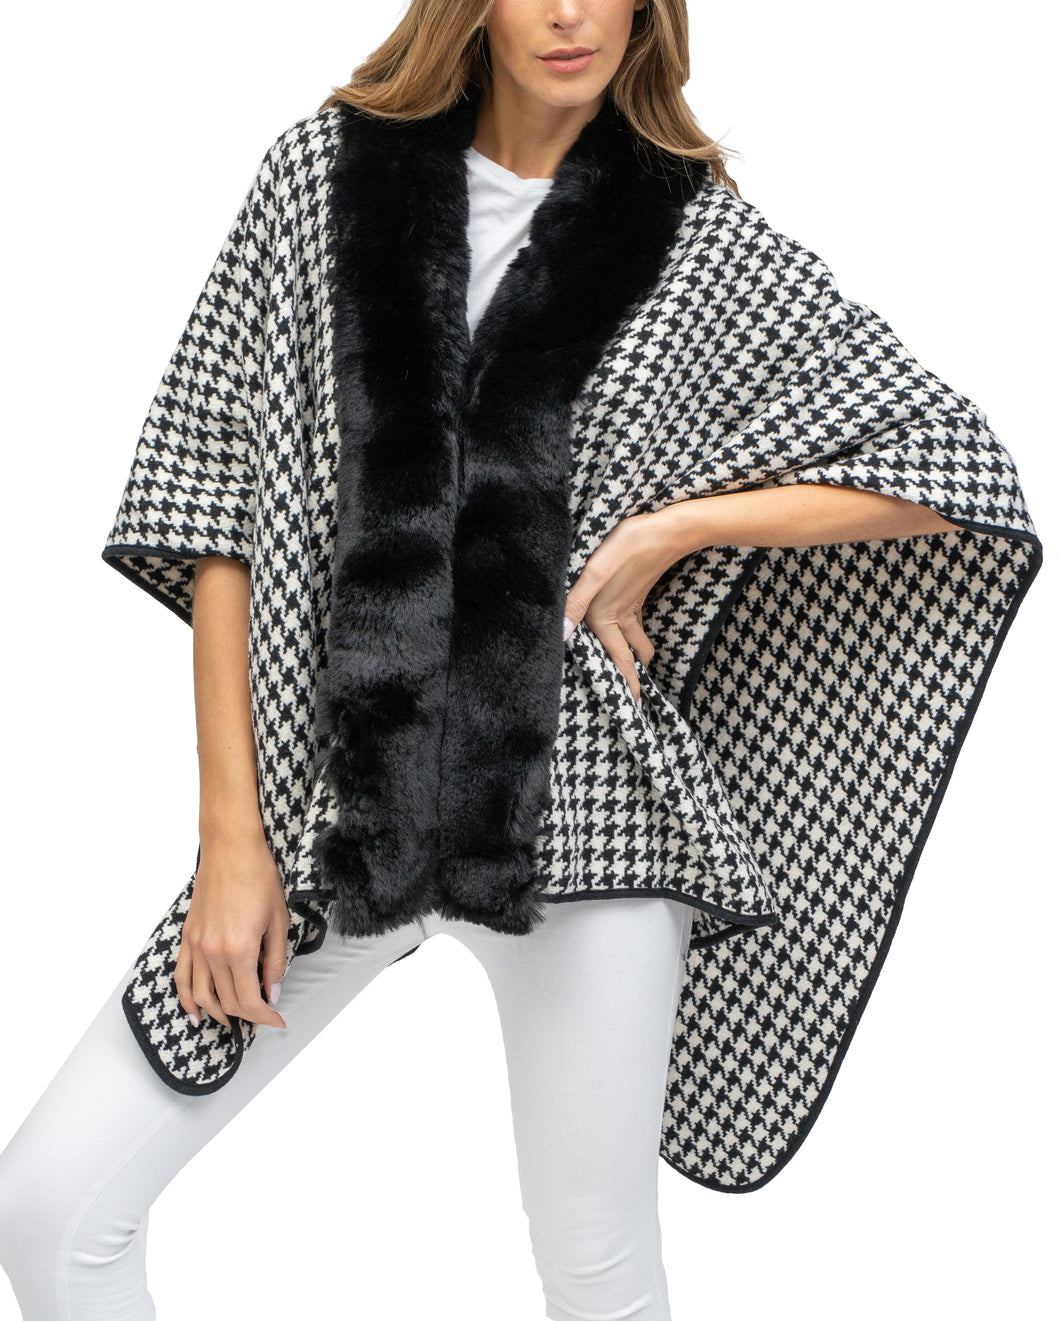 Thick Houndstooth Ruana with Mink Trim - Just Jamie